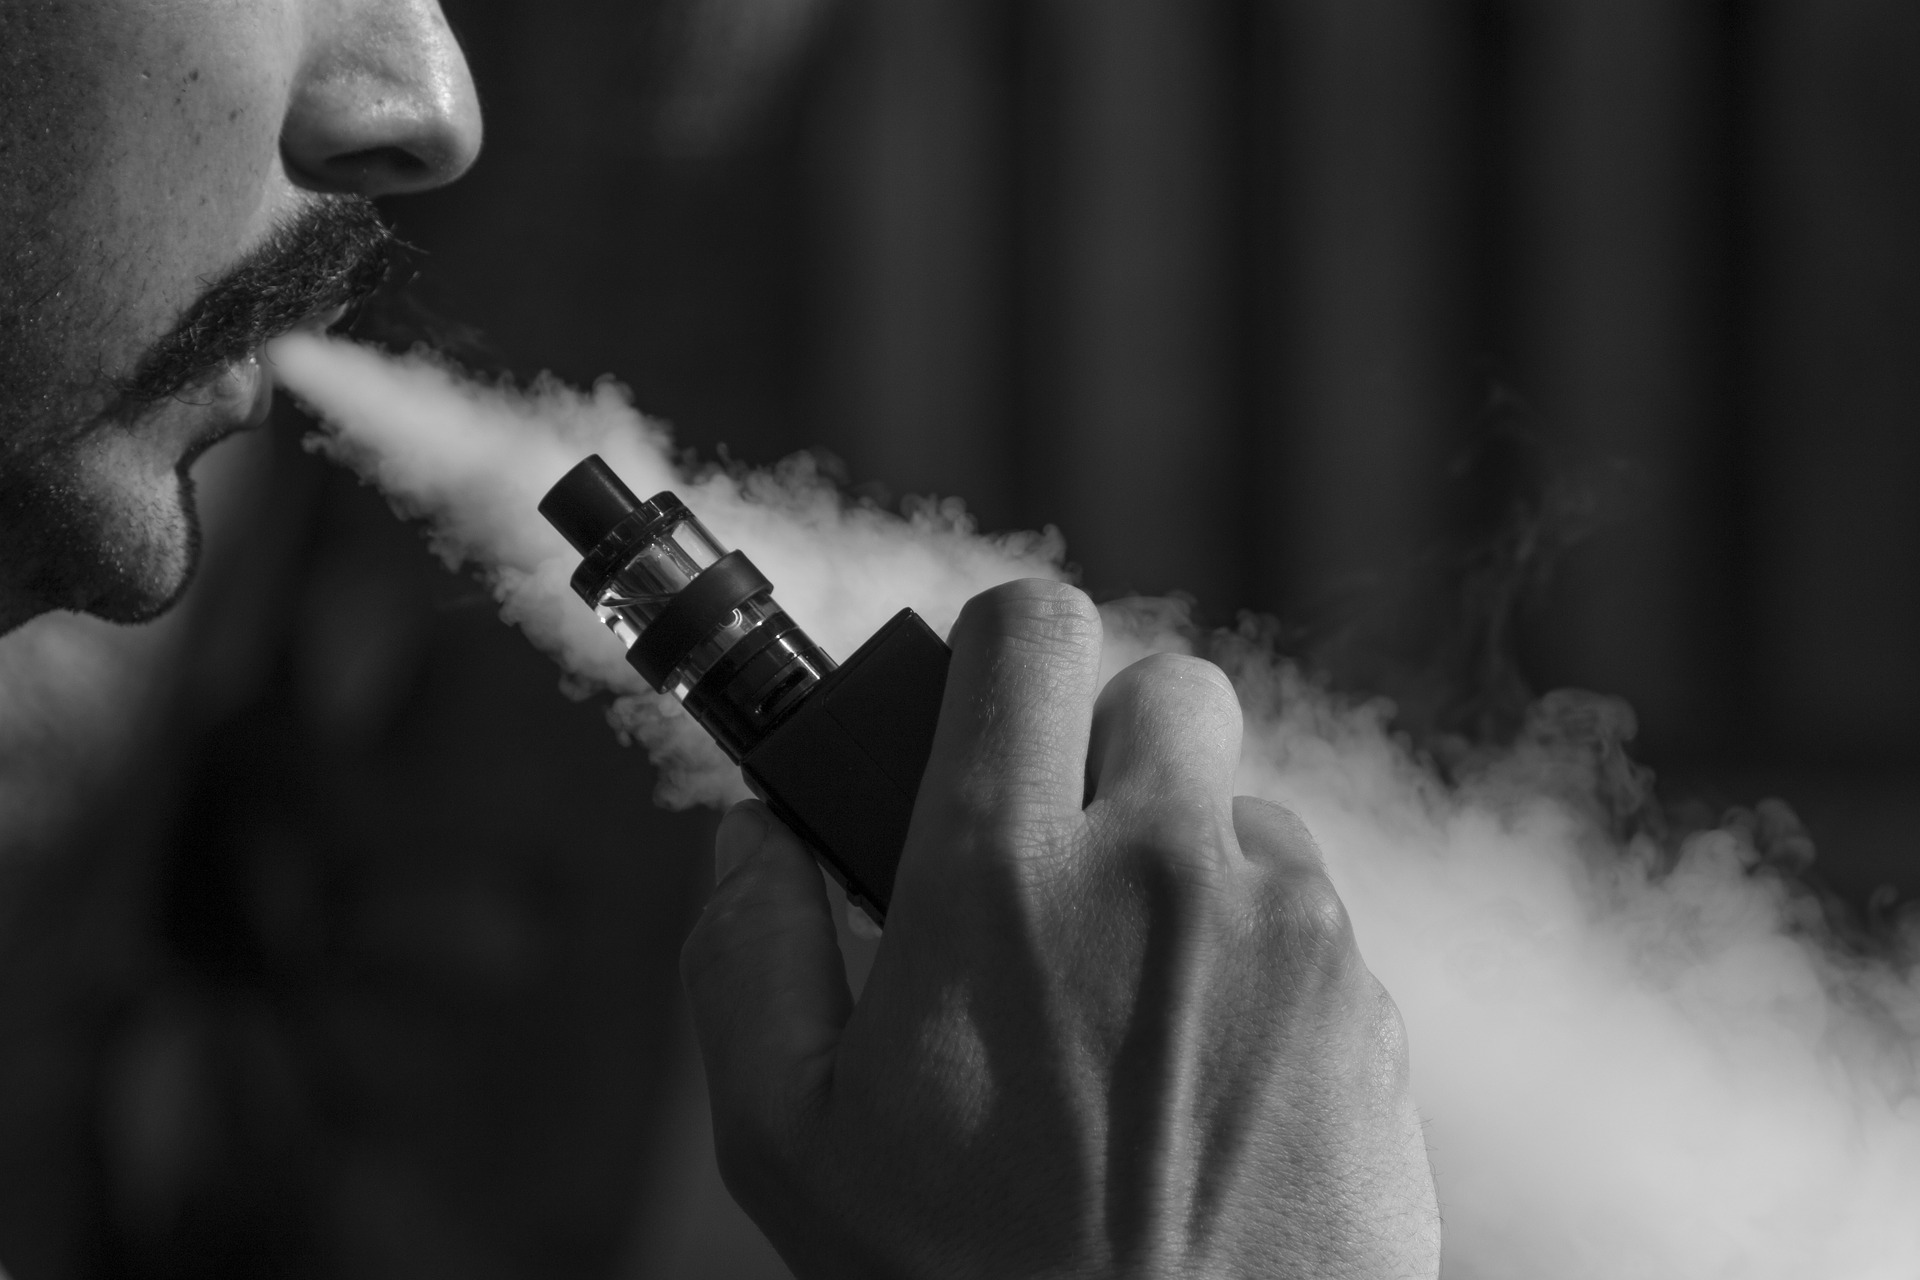 How To Find The Best Online Vaporizer UK